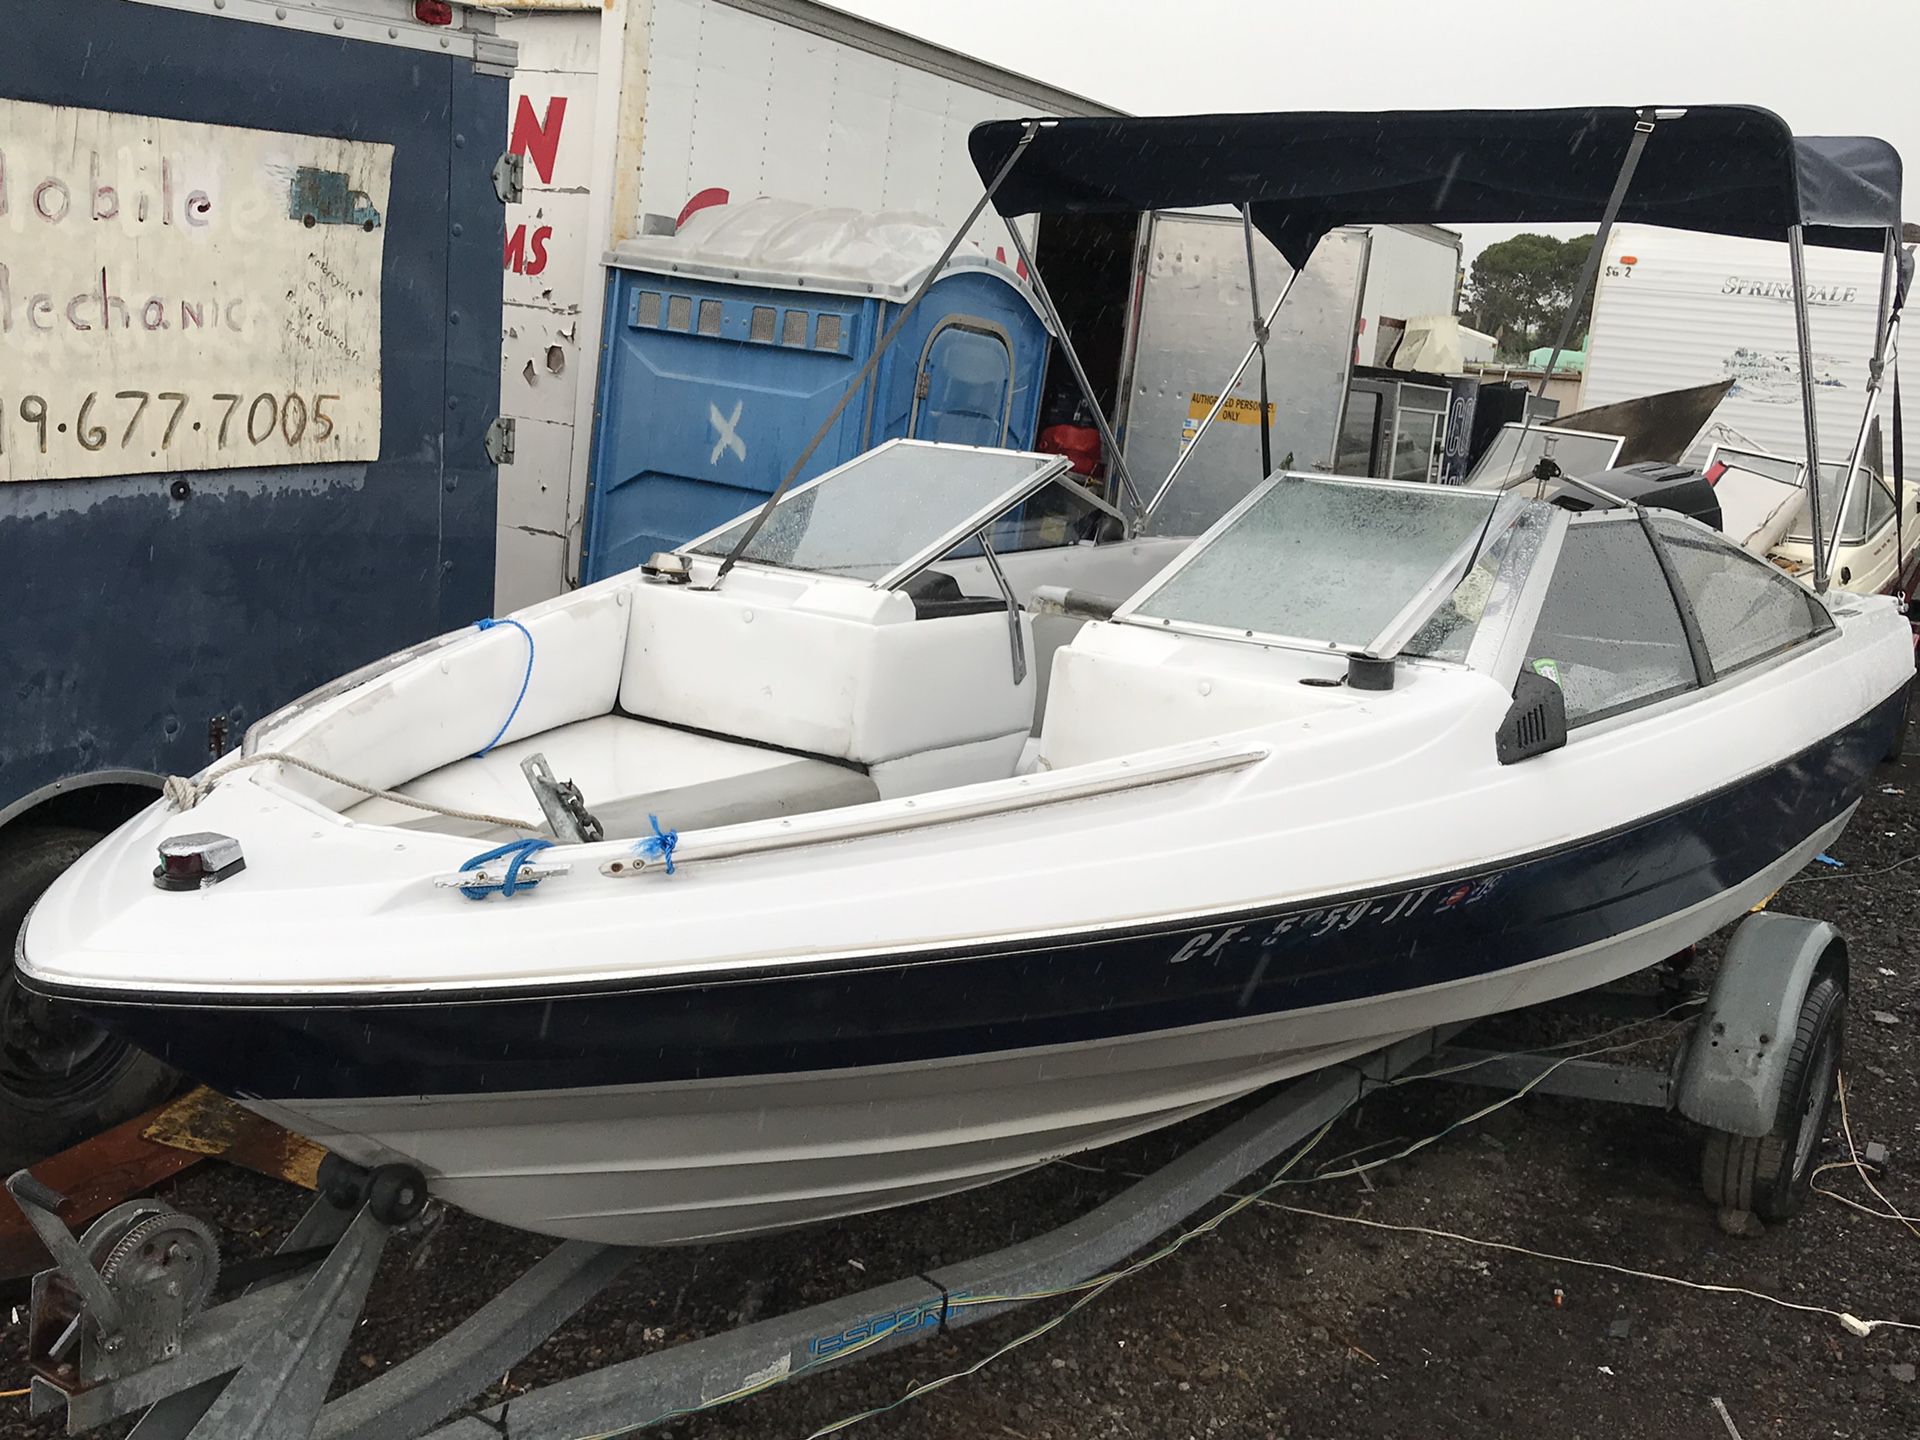 1988 18 Ft open bow bayliner boat with galvanized single axel trailer, 125 hp force 4 cyl outboard. RUNS GOOD! AS IS!. We can test it